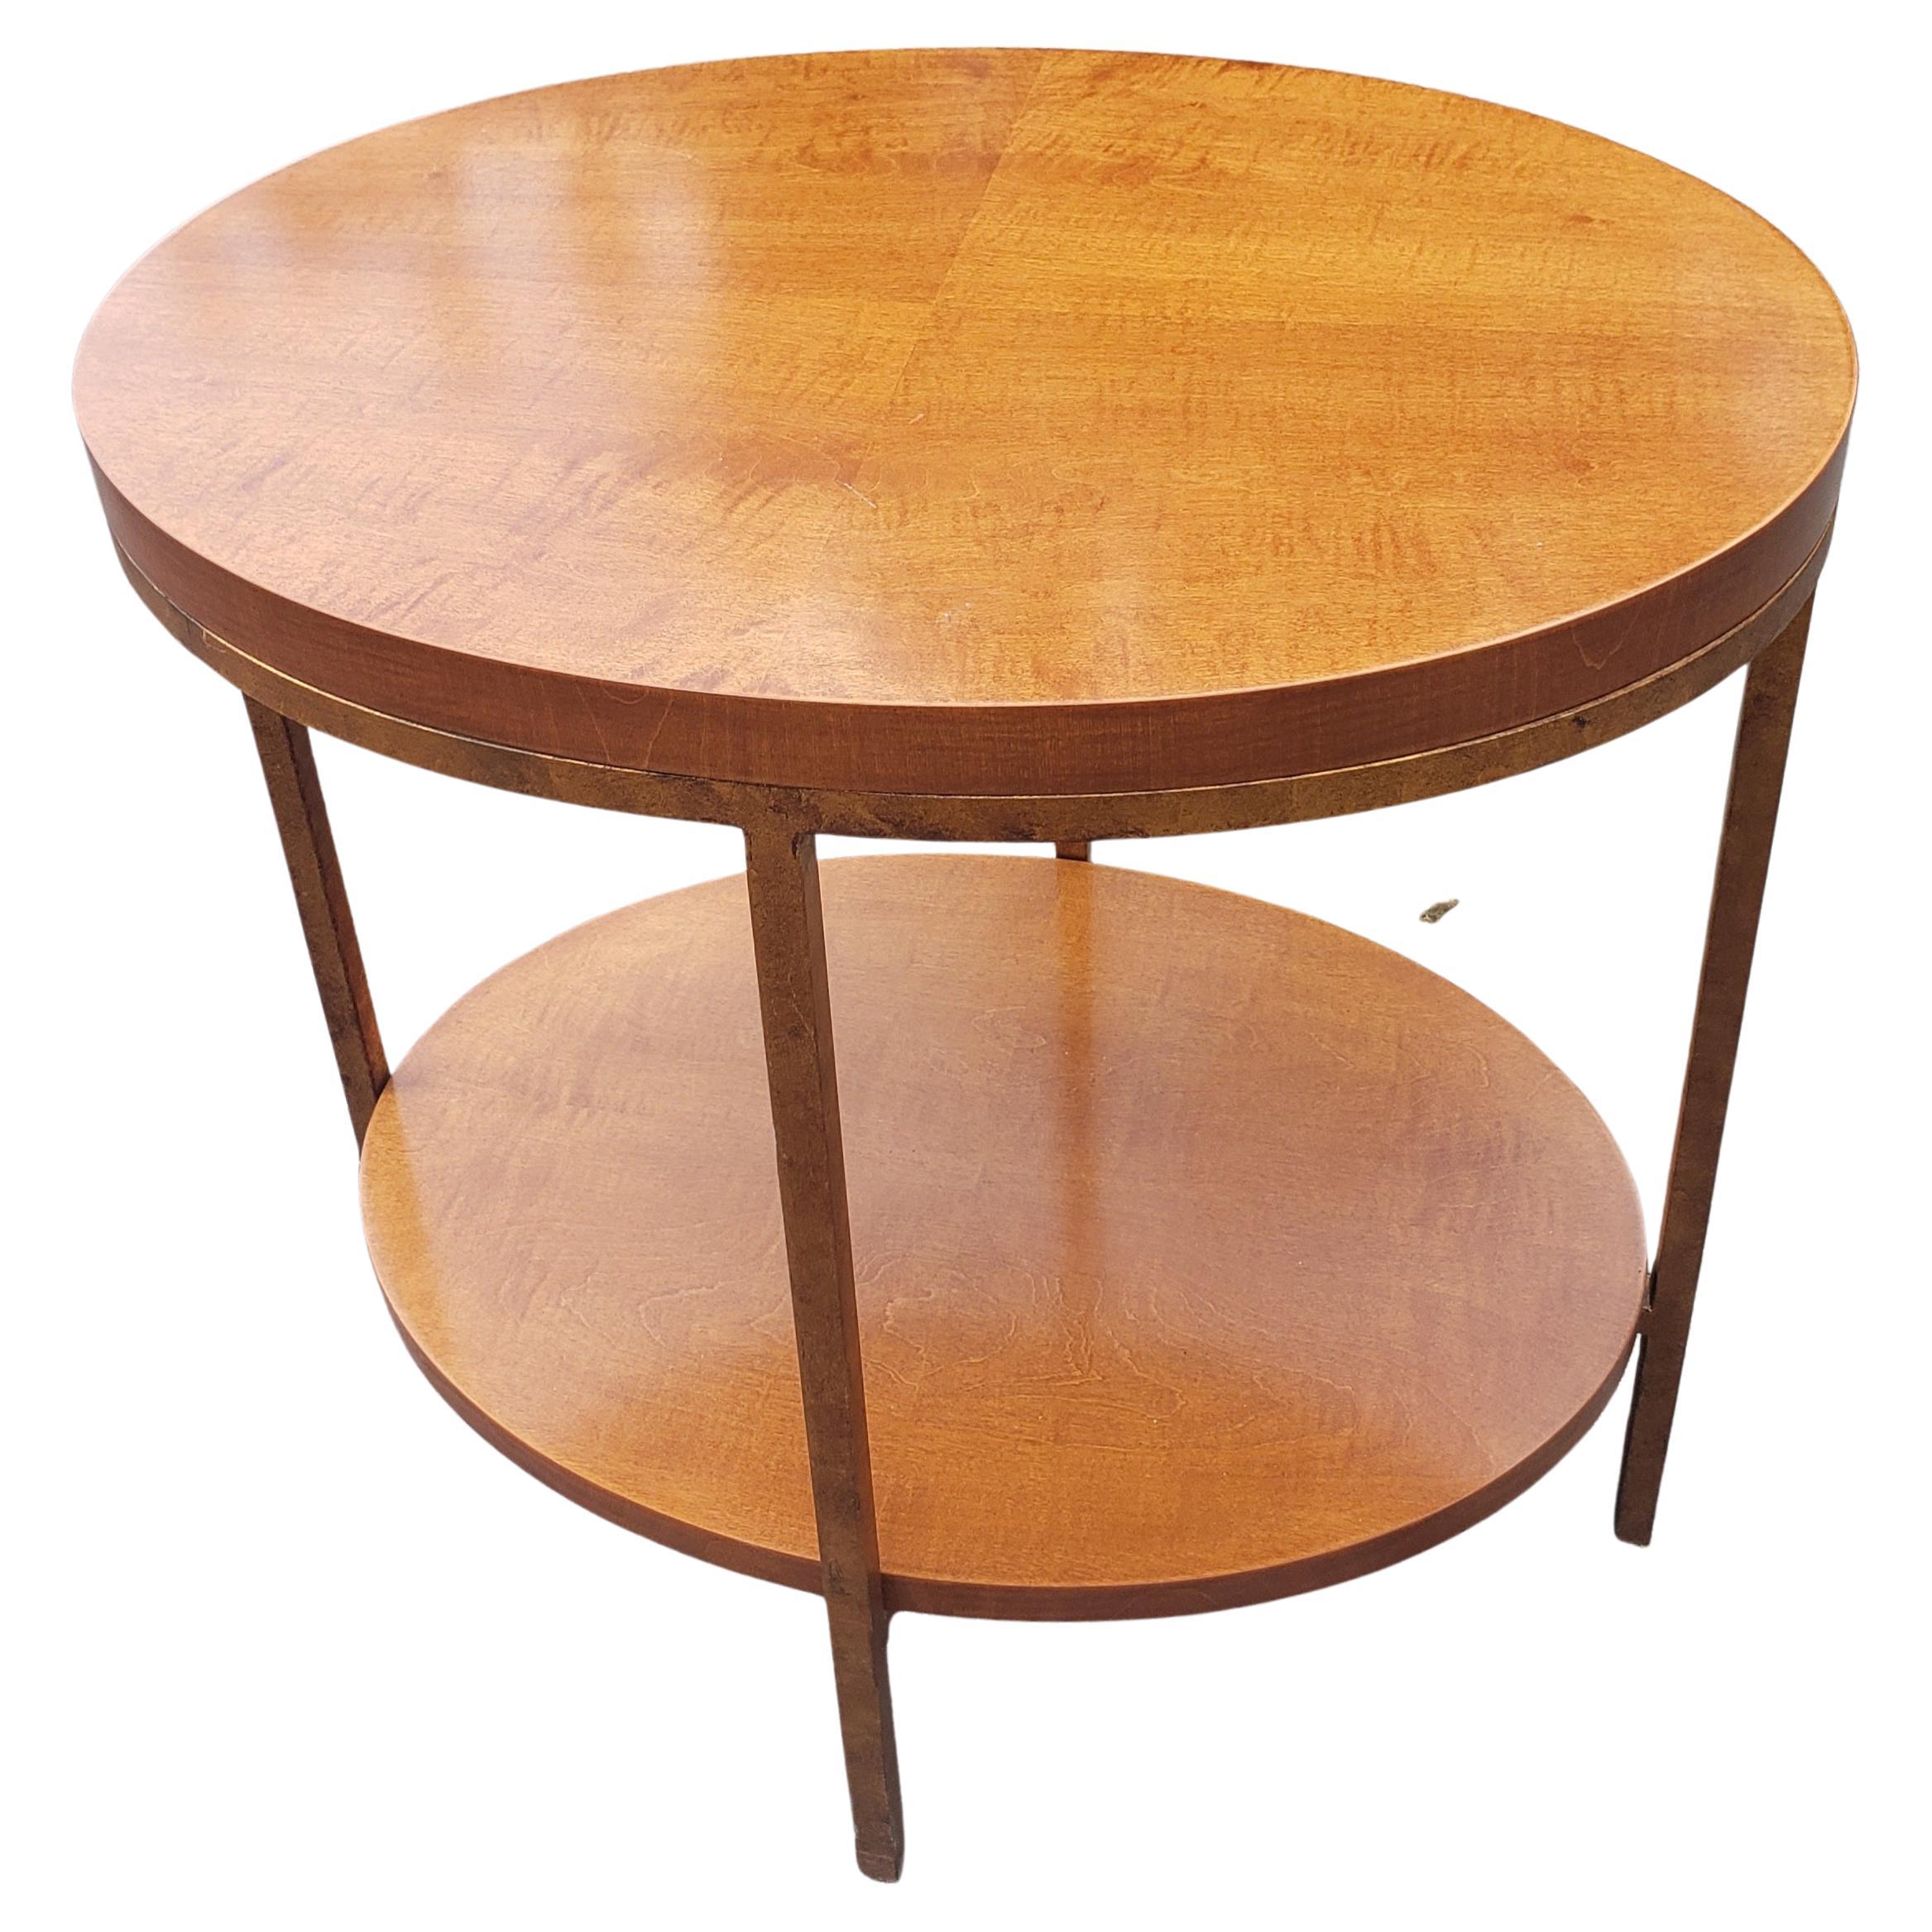 A stylish contemporary two tier oval table by Baker Furniture in primavera mahogany(blonde mahogany) and gilt metal frame. The table features an extremely heavy, sturdy and gorgeous with
Bookmached wood grain. The original Baker label is present.